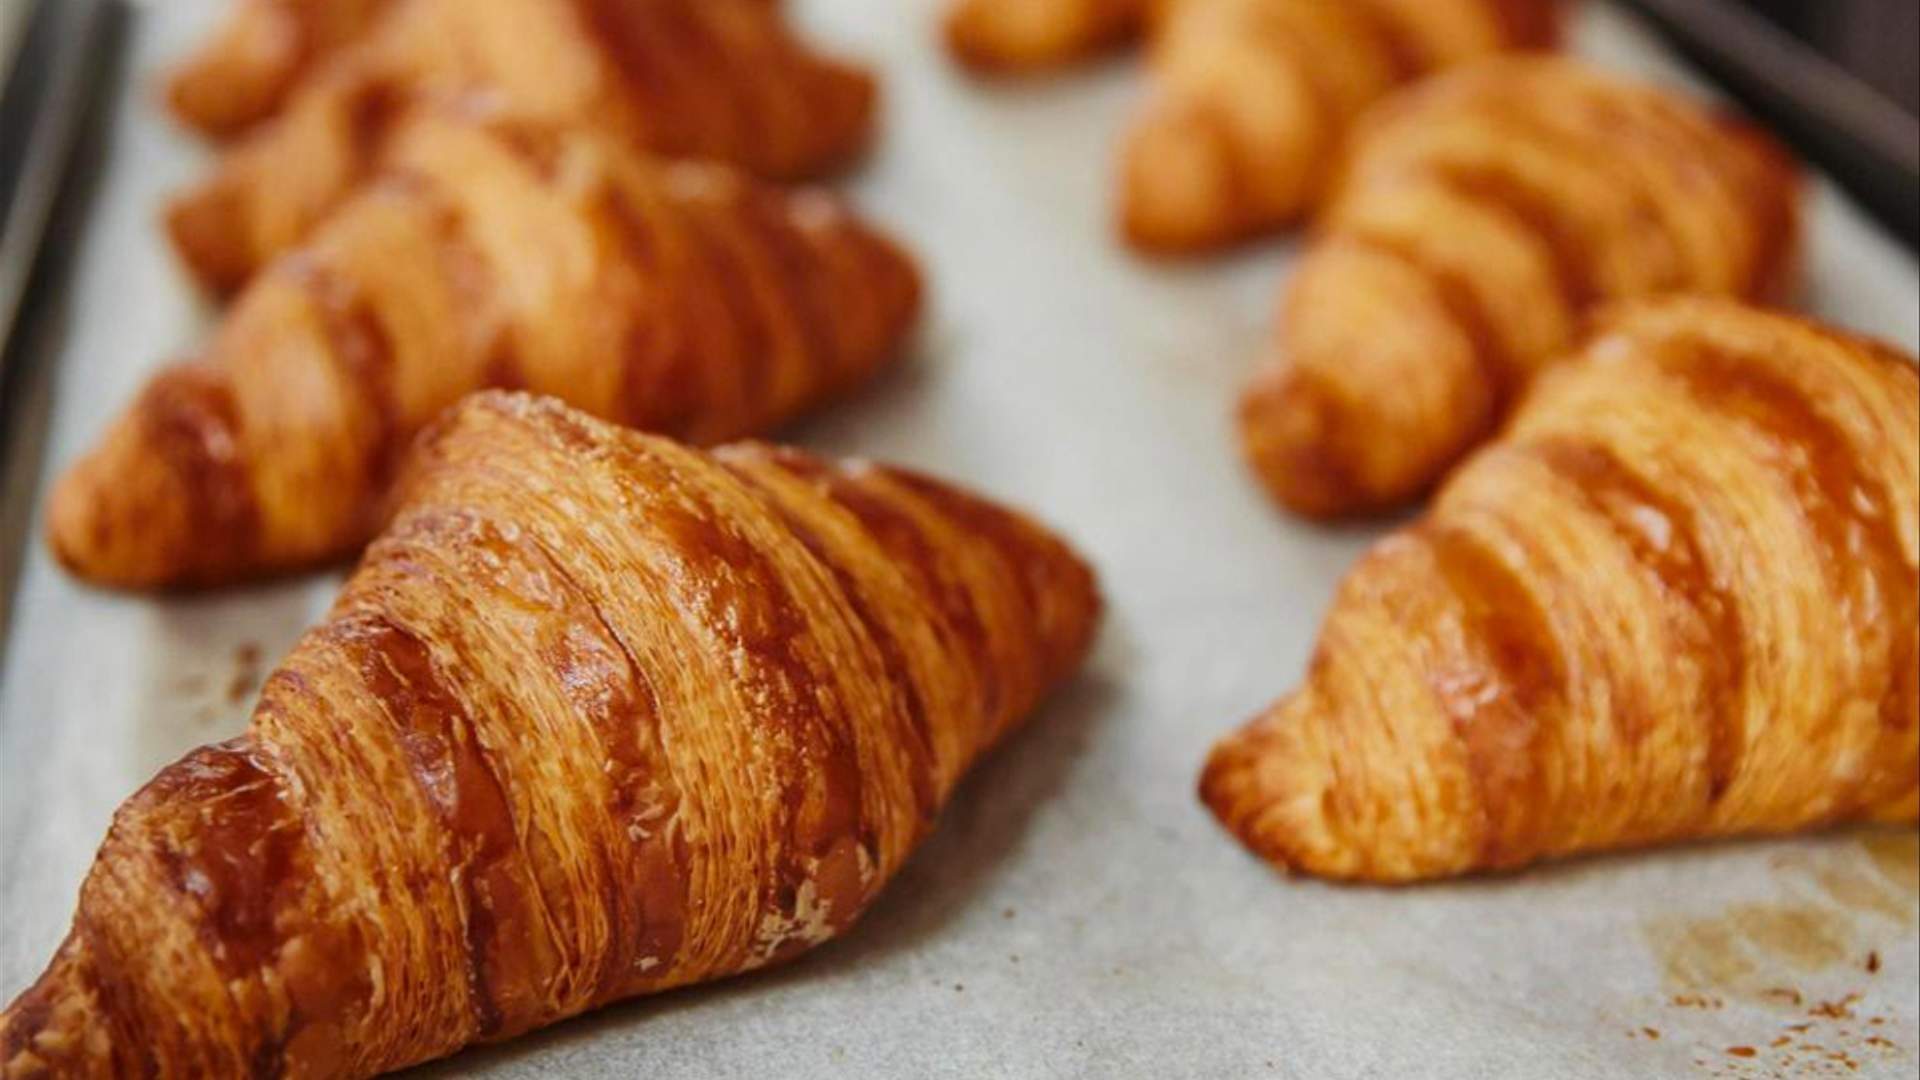 Two rows of freshly baked croissants on oven trays.